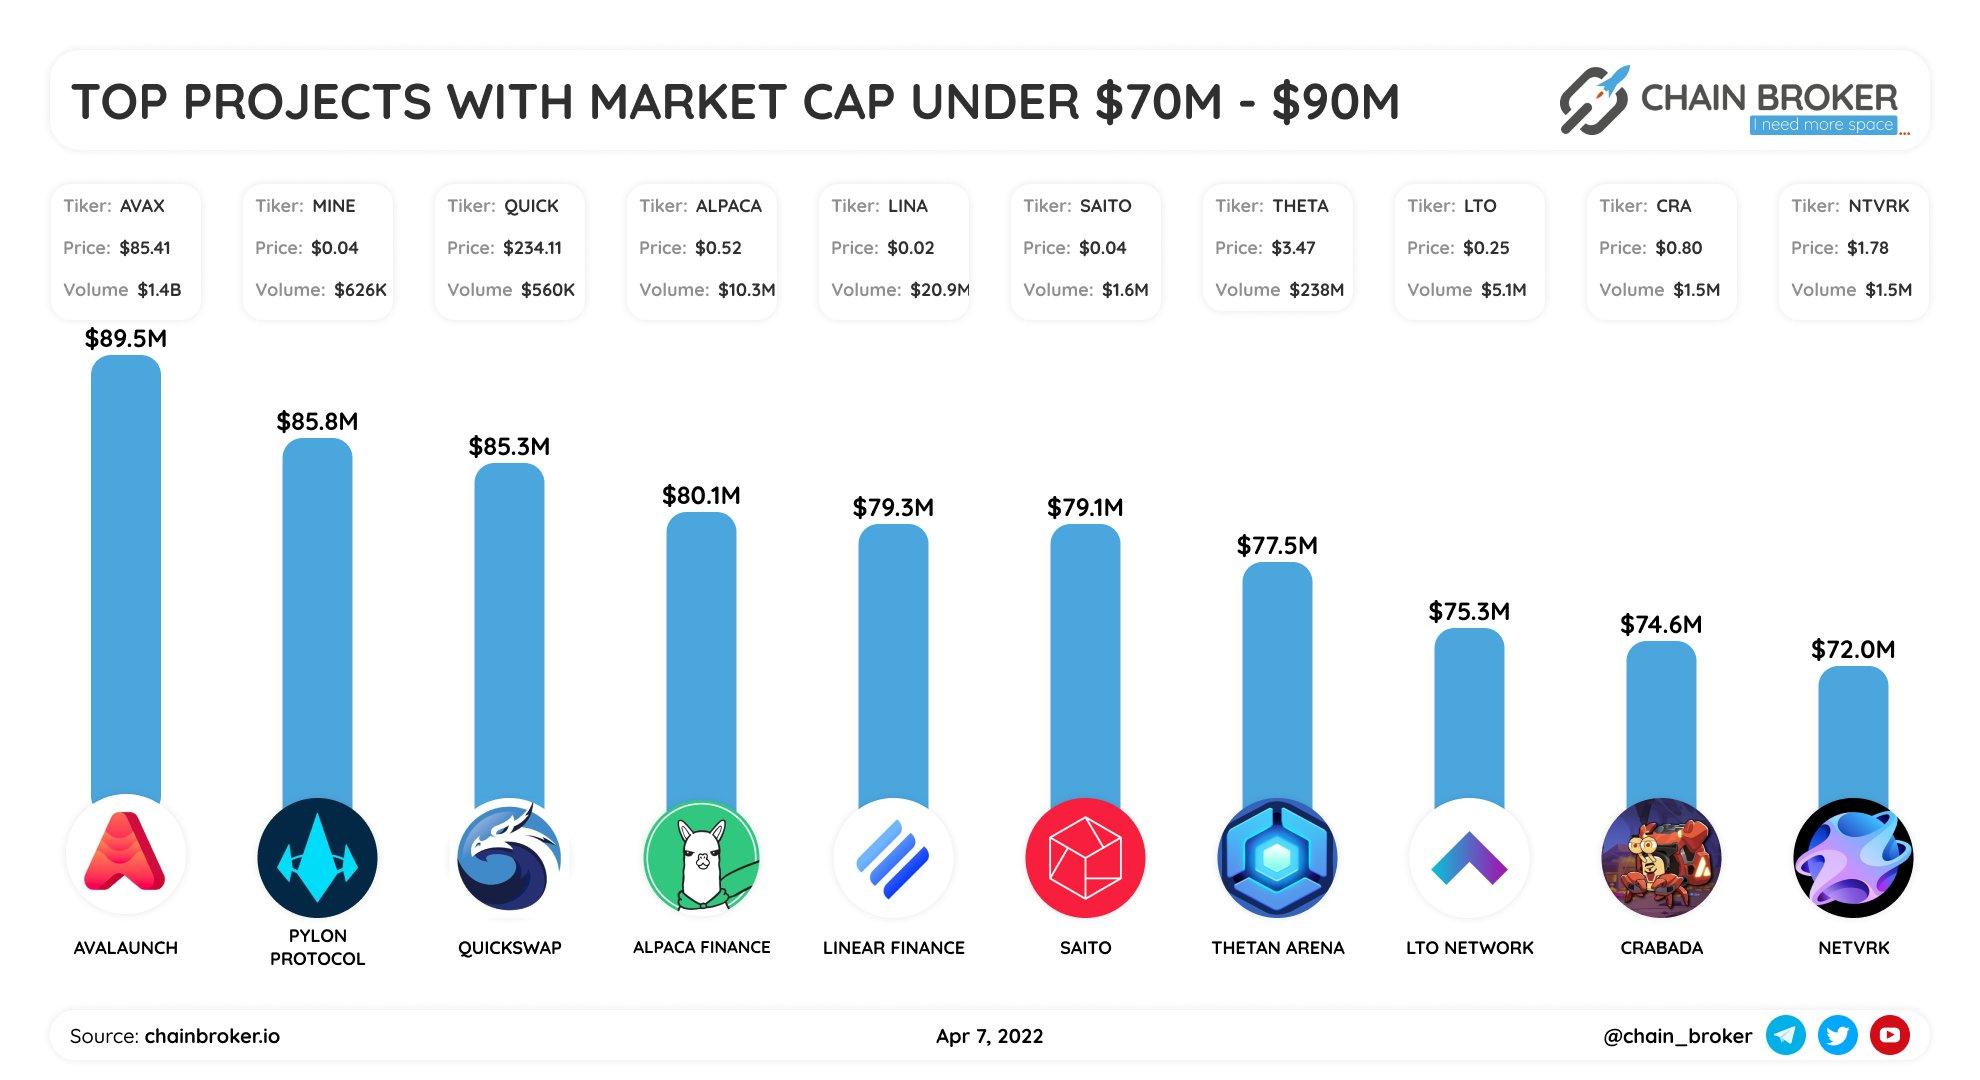 Top projects with market cap $70M - $90M